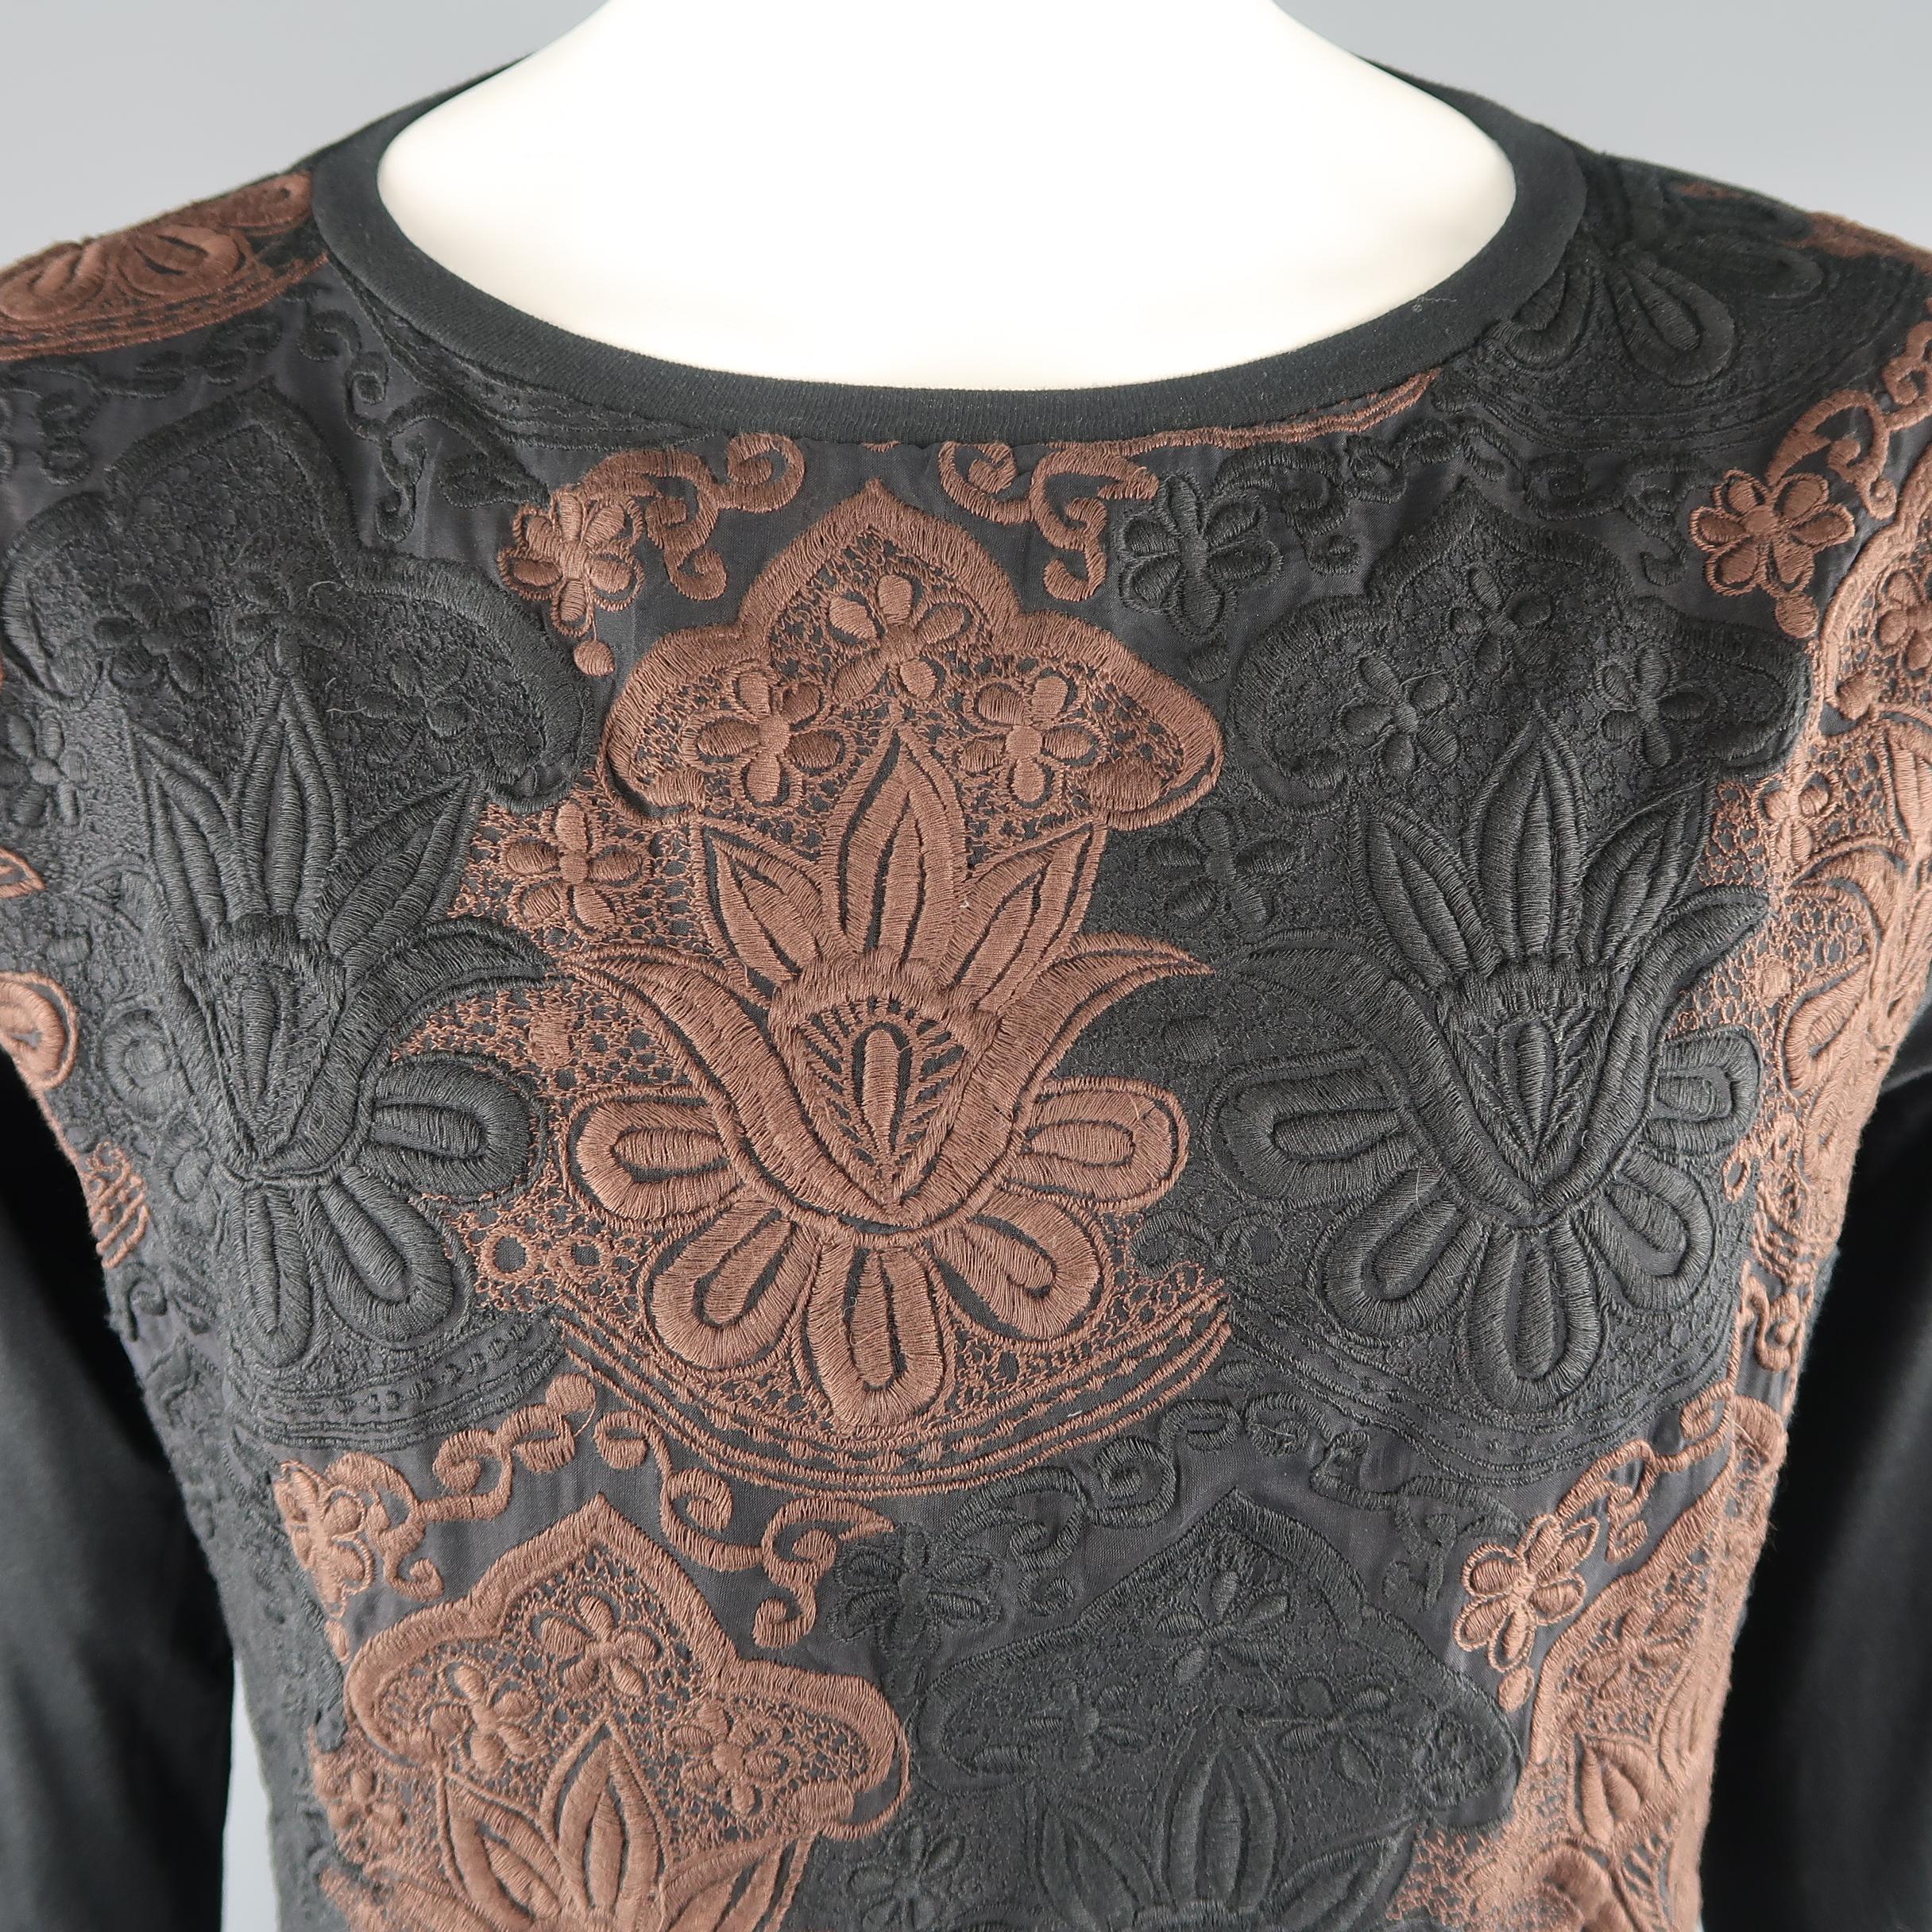 DRIES VAN NOTEN long sleeve pullover comes in a black cotton and silk, with embroideries in black and brown and crew neck.
 
Excellent  Pre-Owned Condition.
Marked: S
 
Measurements:

    Shoulder: 17.5  in.
    Chest: 45 in.
    Sleeve: 27.5  in.
 